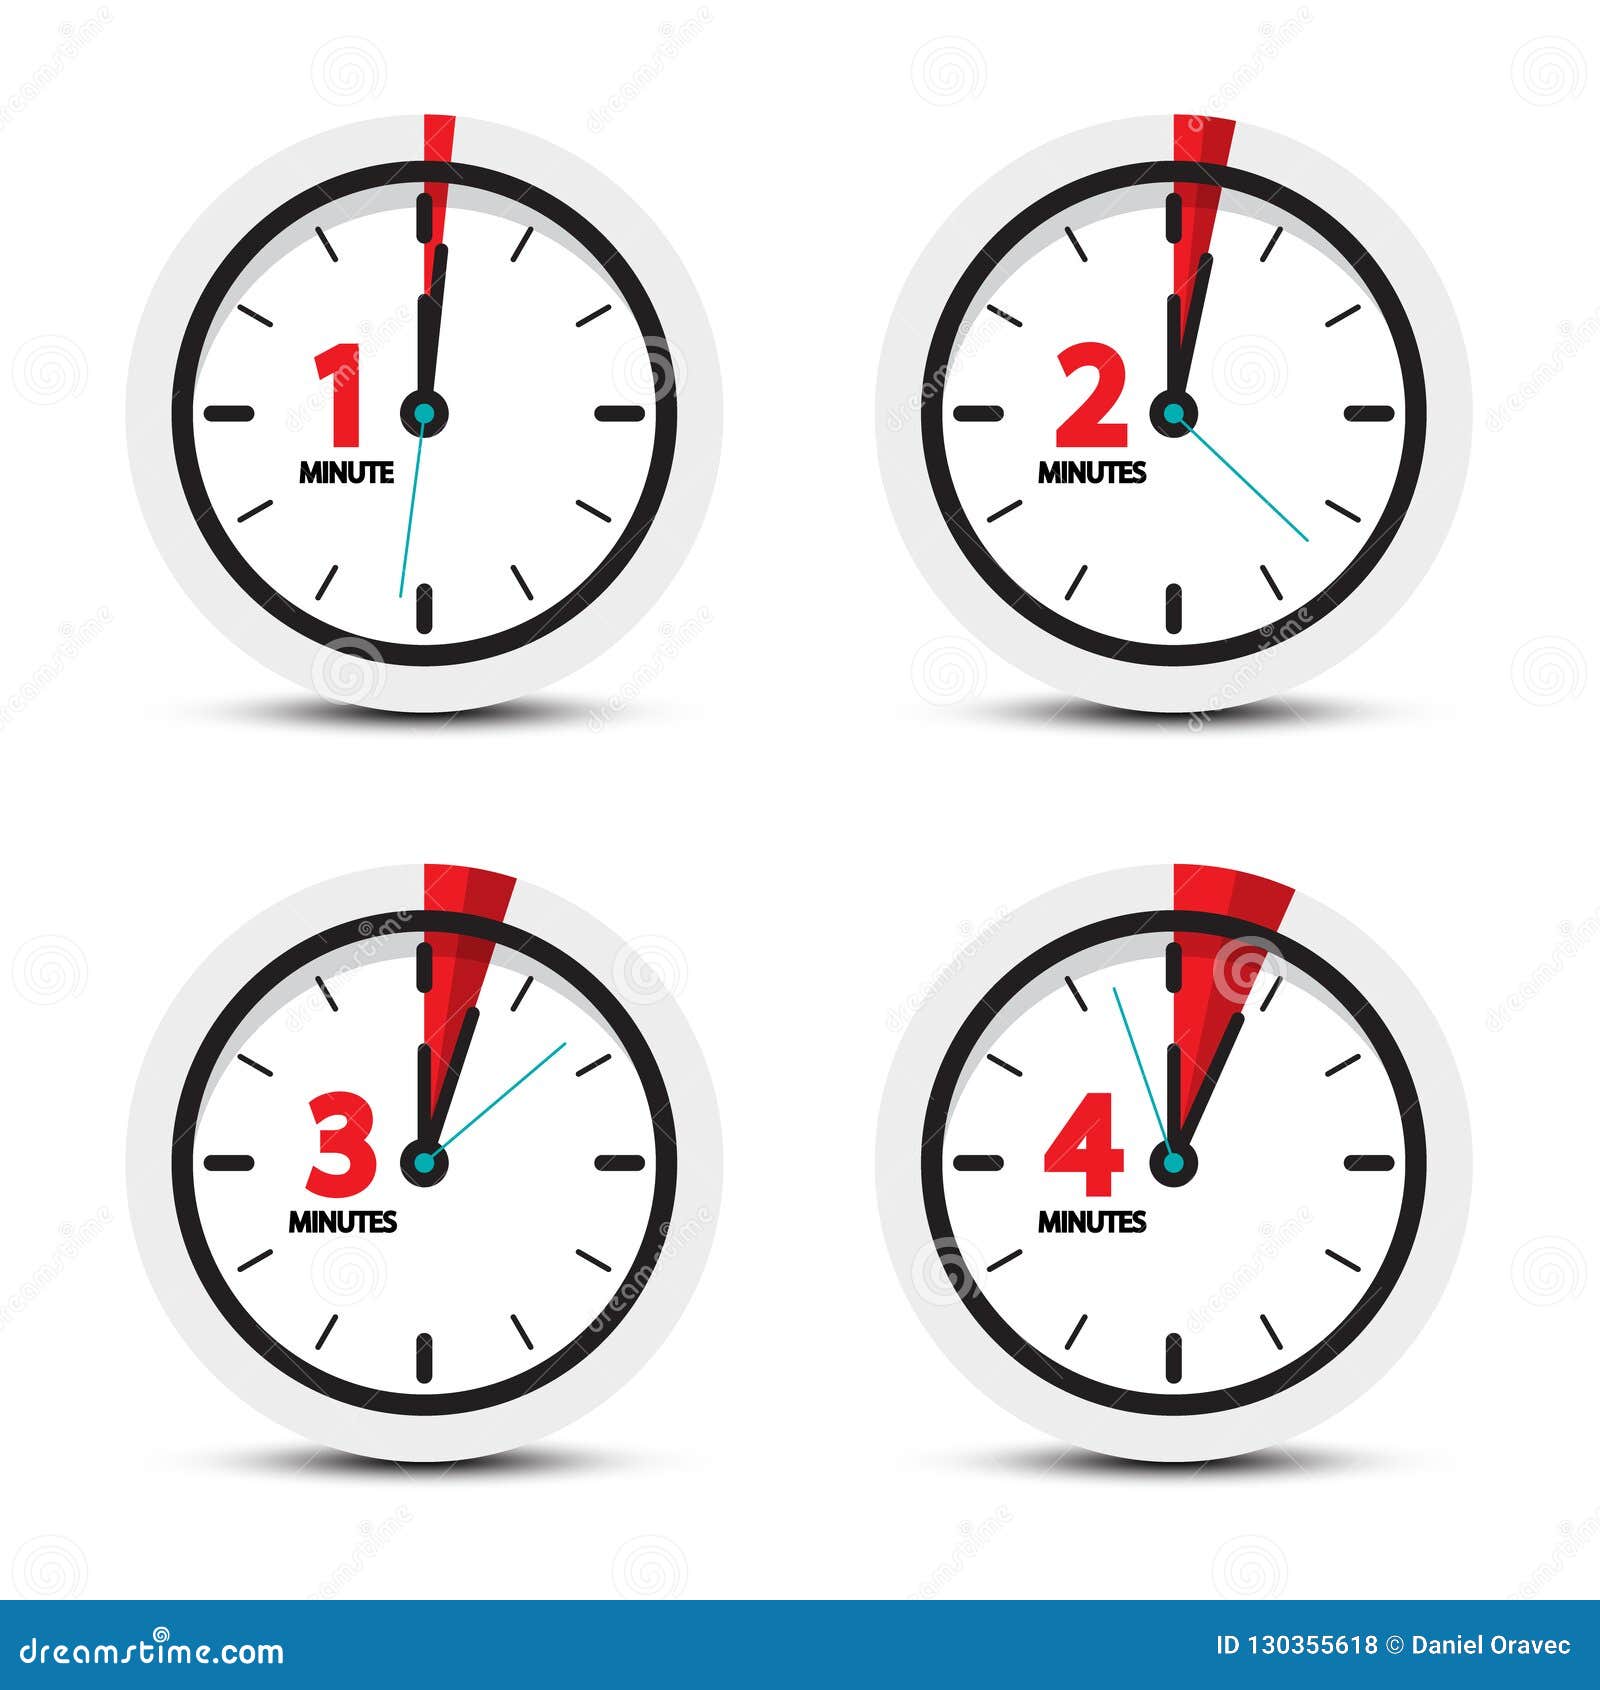 clock. 1, 2, 3, 4 minutes time icons.